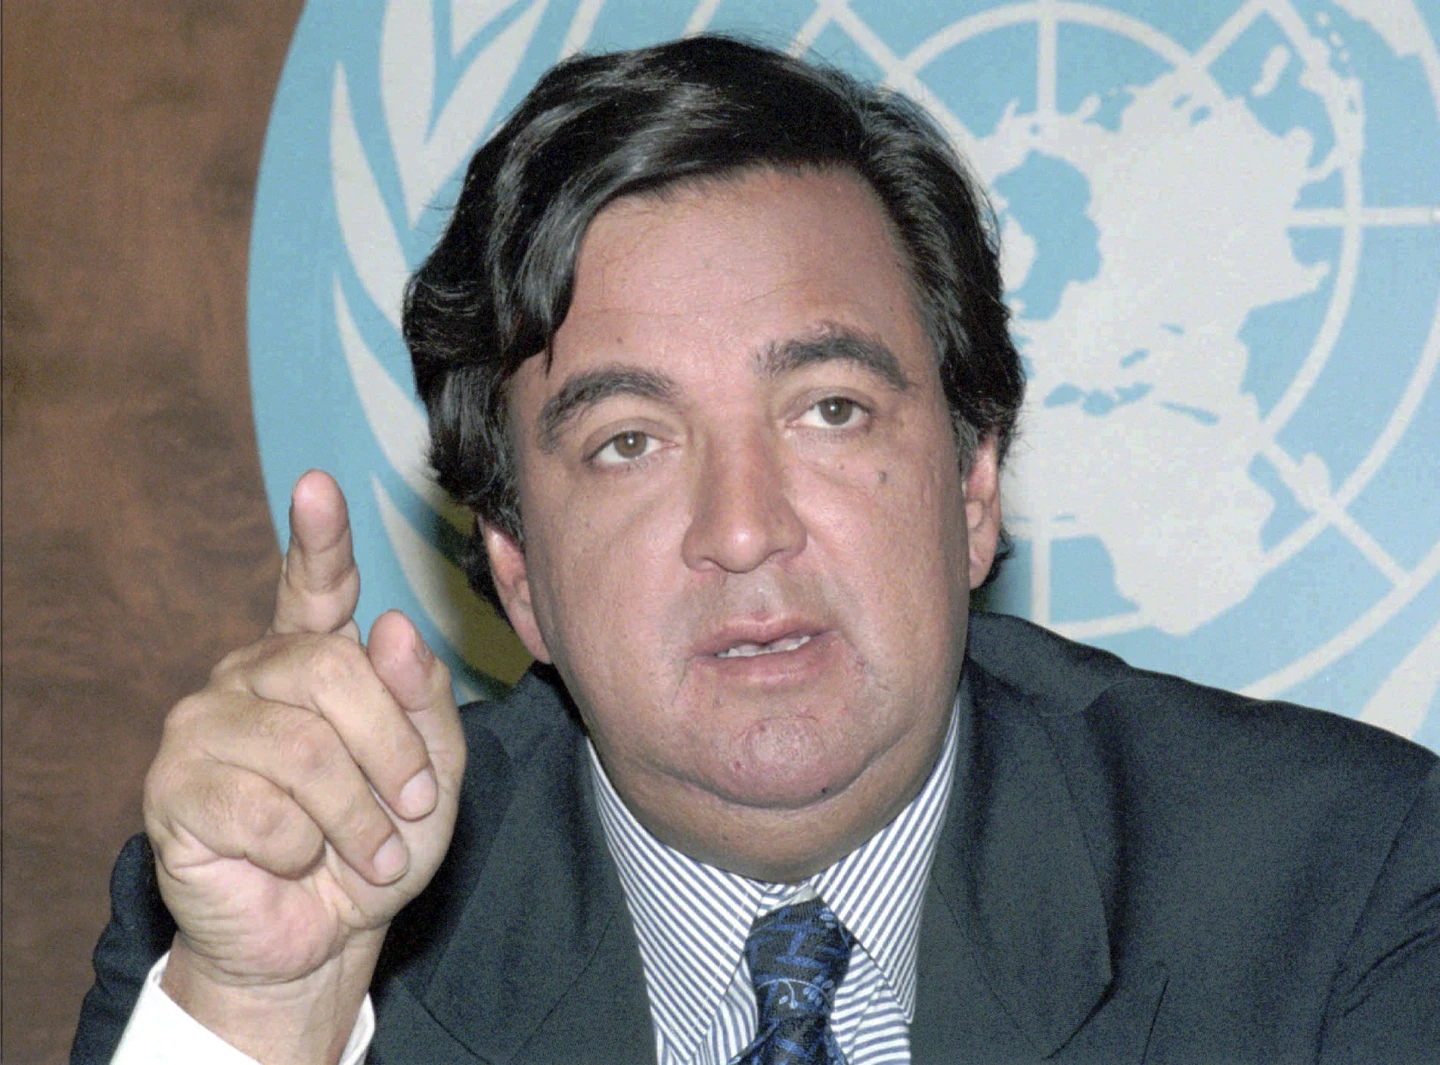 Bill Richardson, a former governor and UN ambassador who worked to free detained Americans, dies (apnews.com)